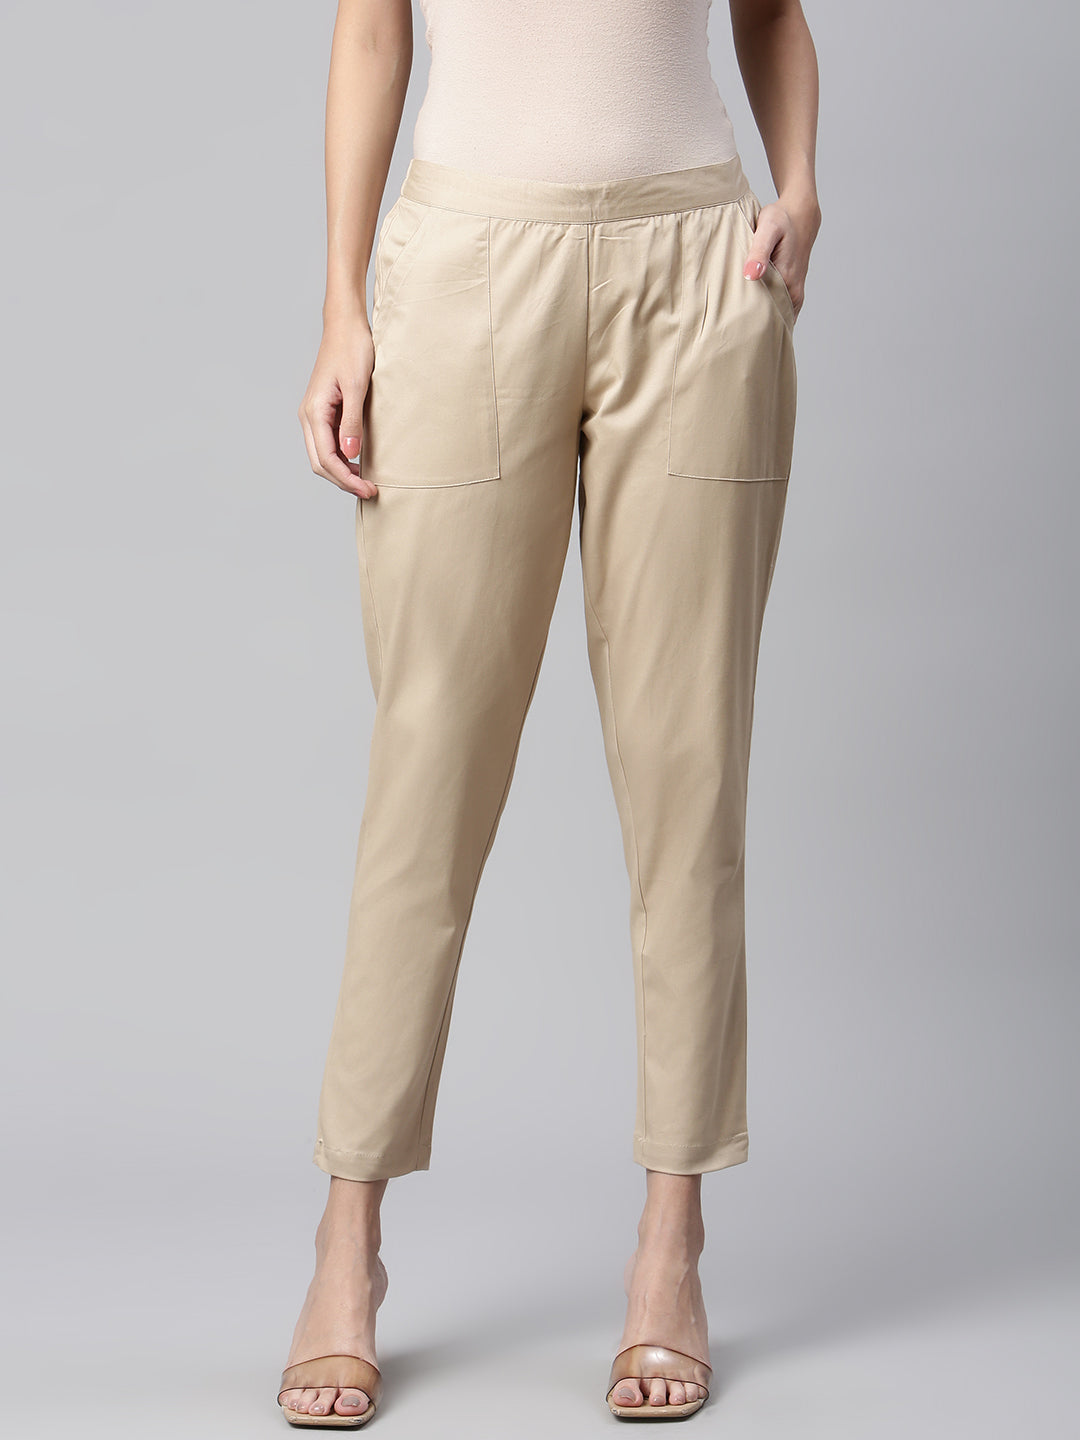 Taupe Tab Detail Wide Leg Pant - Beige - Pants - Full Length - Women's  Clothing - Storm